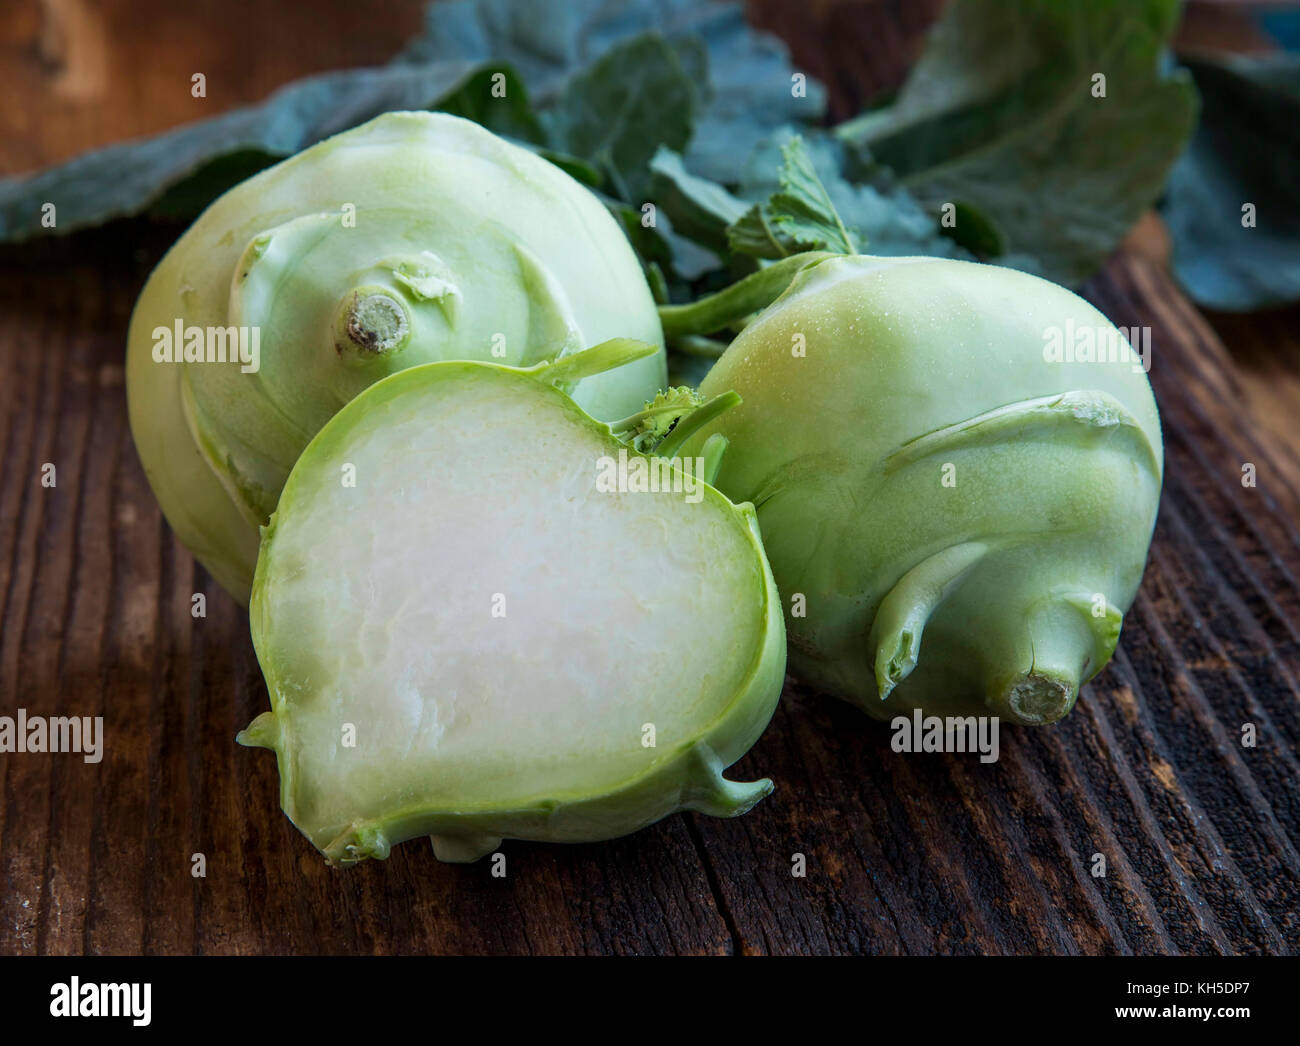 Organic fresh kohlrabi root vegetable wholes and a half on a wooden table Stock Photo